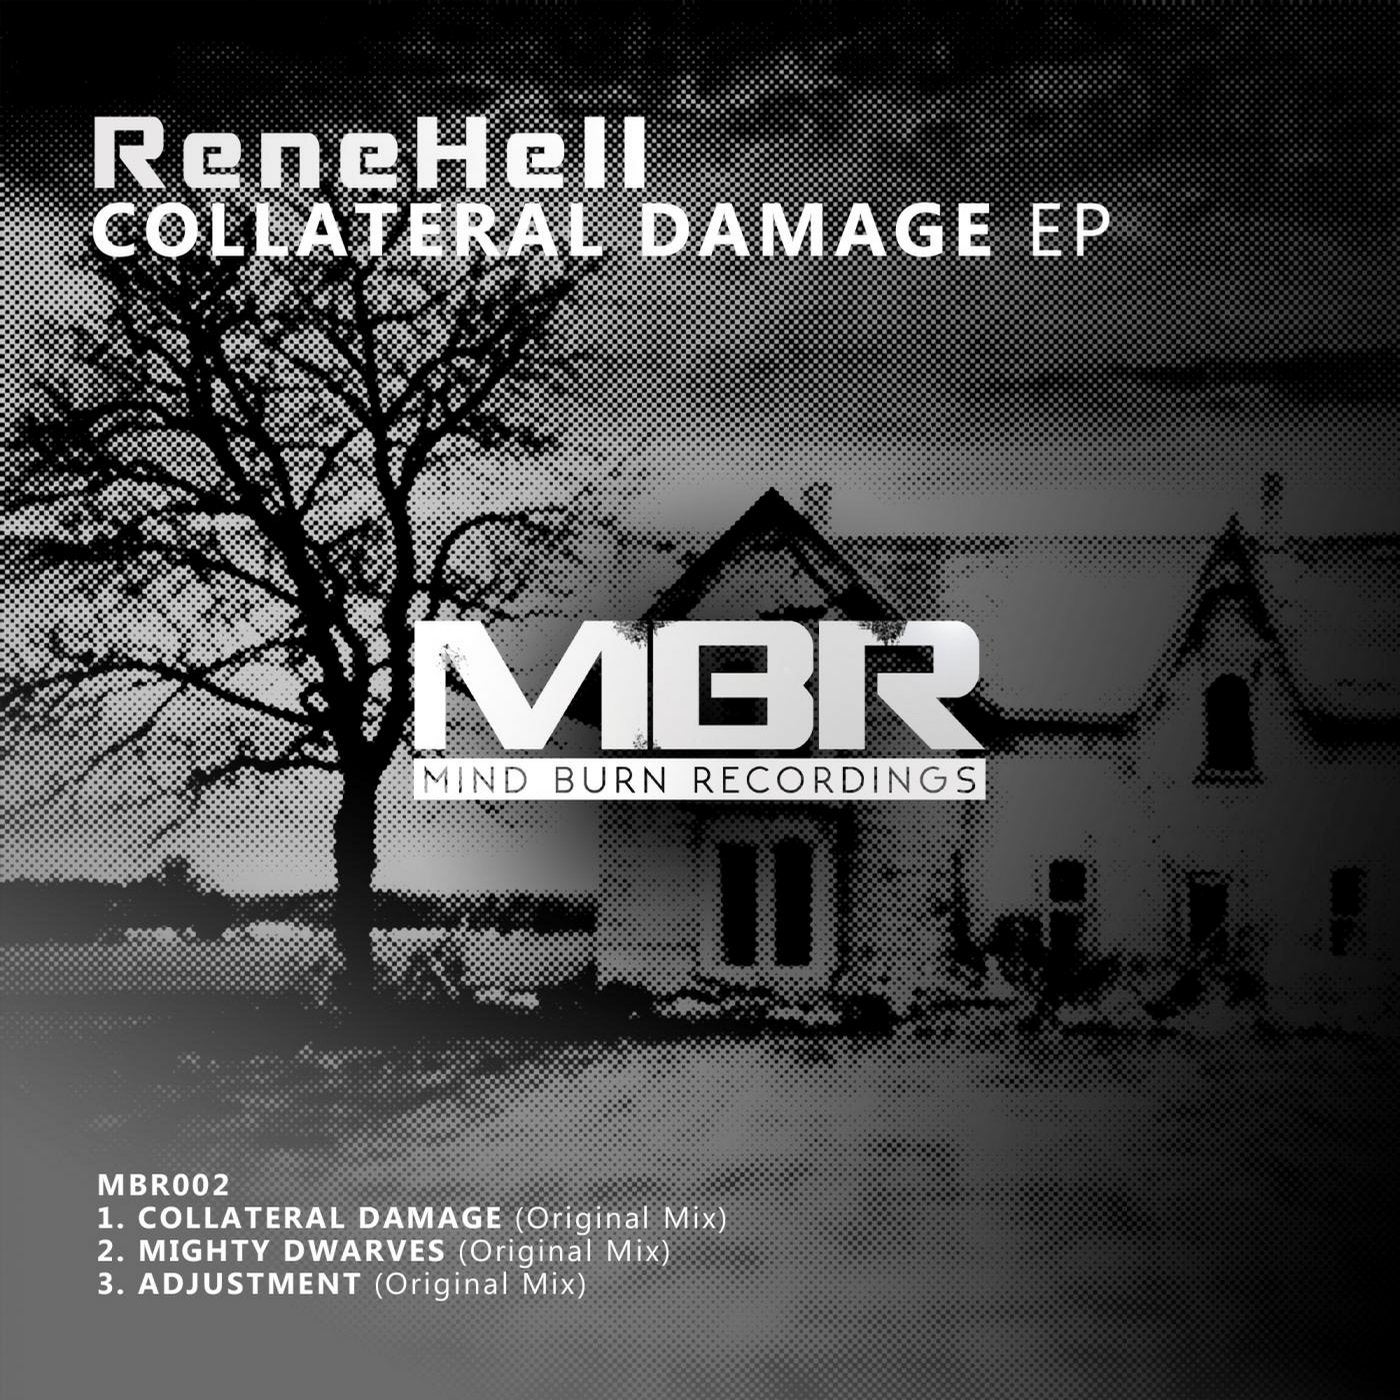 Collateral Damage EP